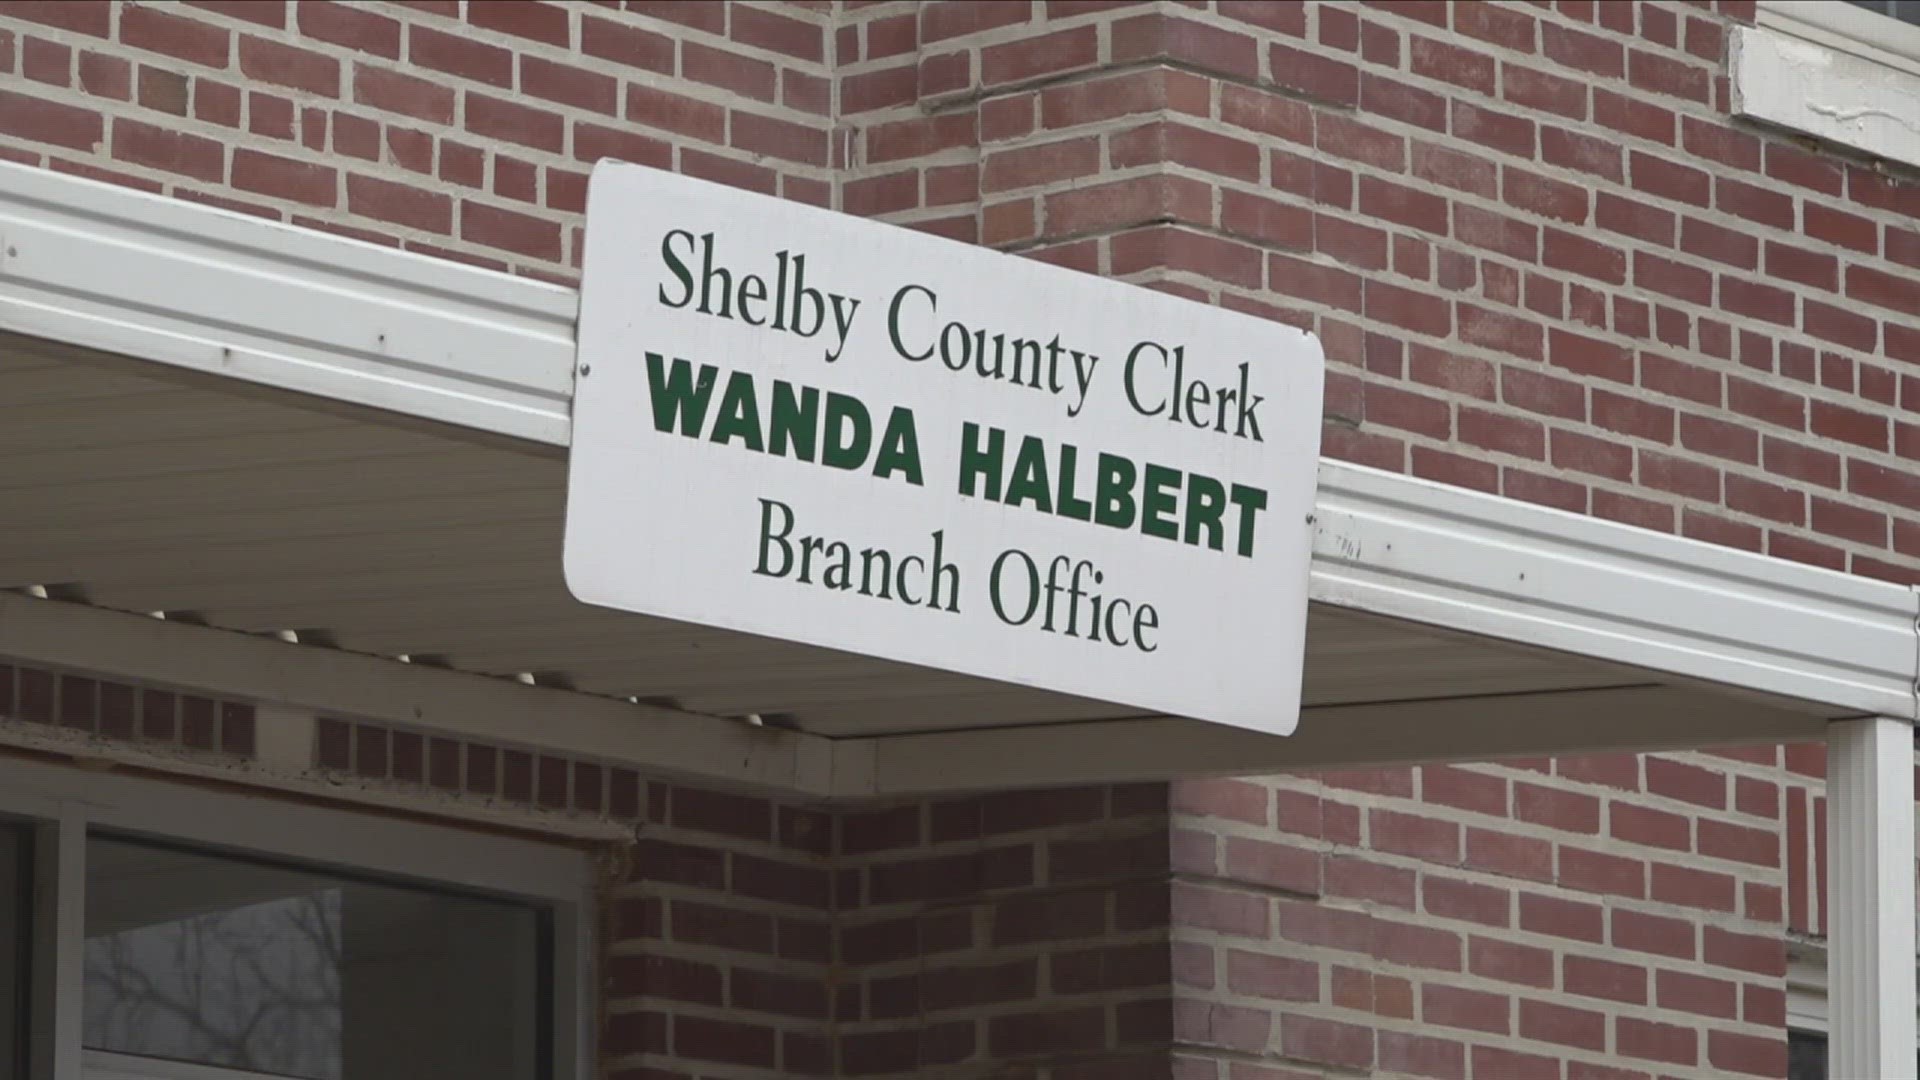 Another day brings more drama over how Shelby County Clerk Wanda Halbert is keeping track of tax dollars.